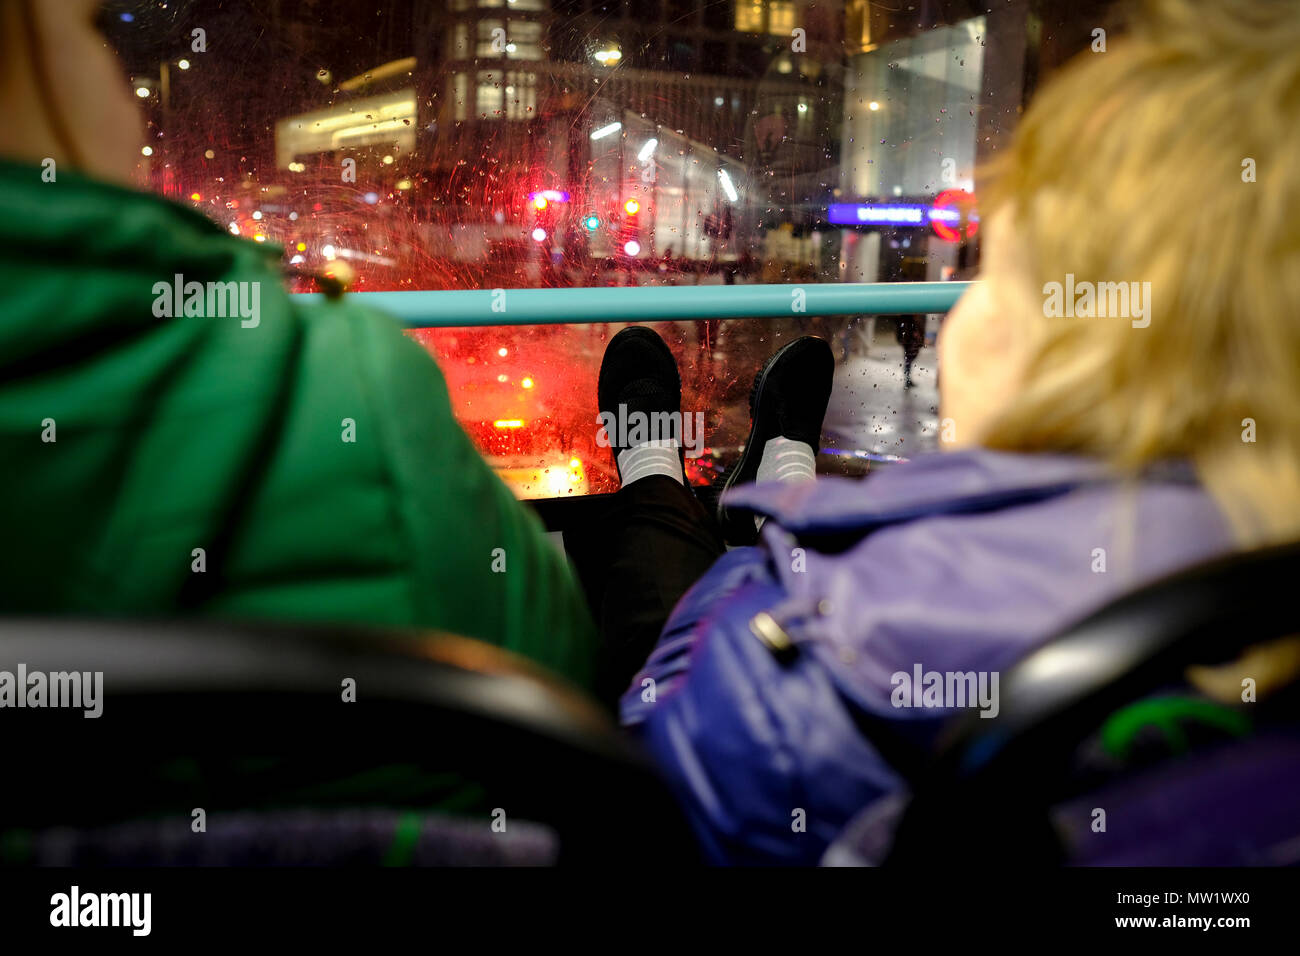 Women resting their feet on the front window's windowsill of the double decker bus in London, UK. Stock Photo